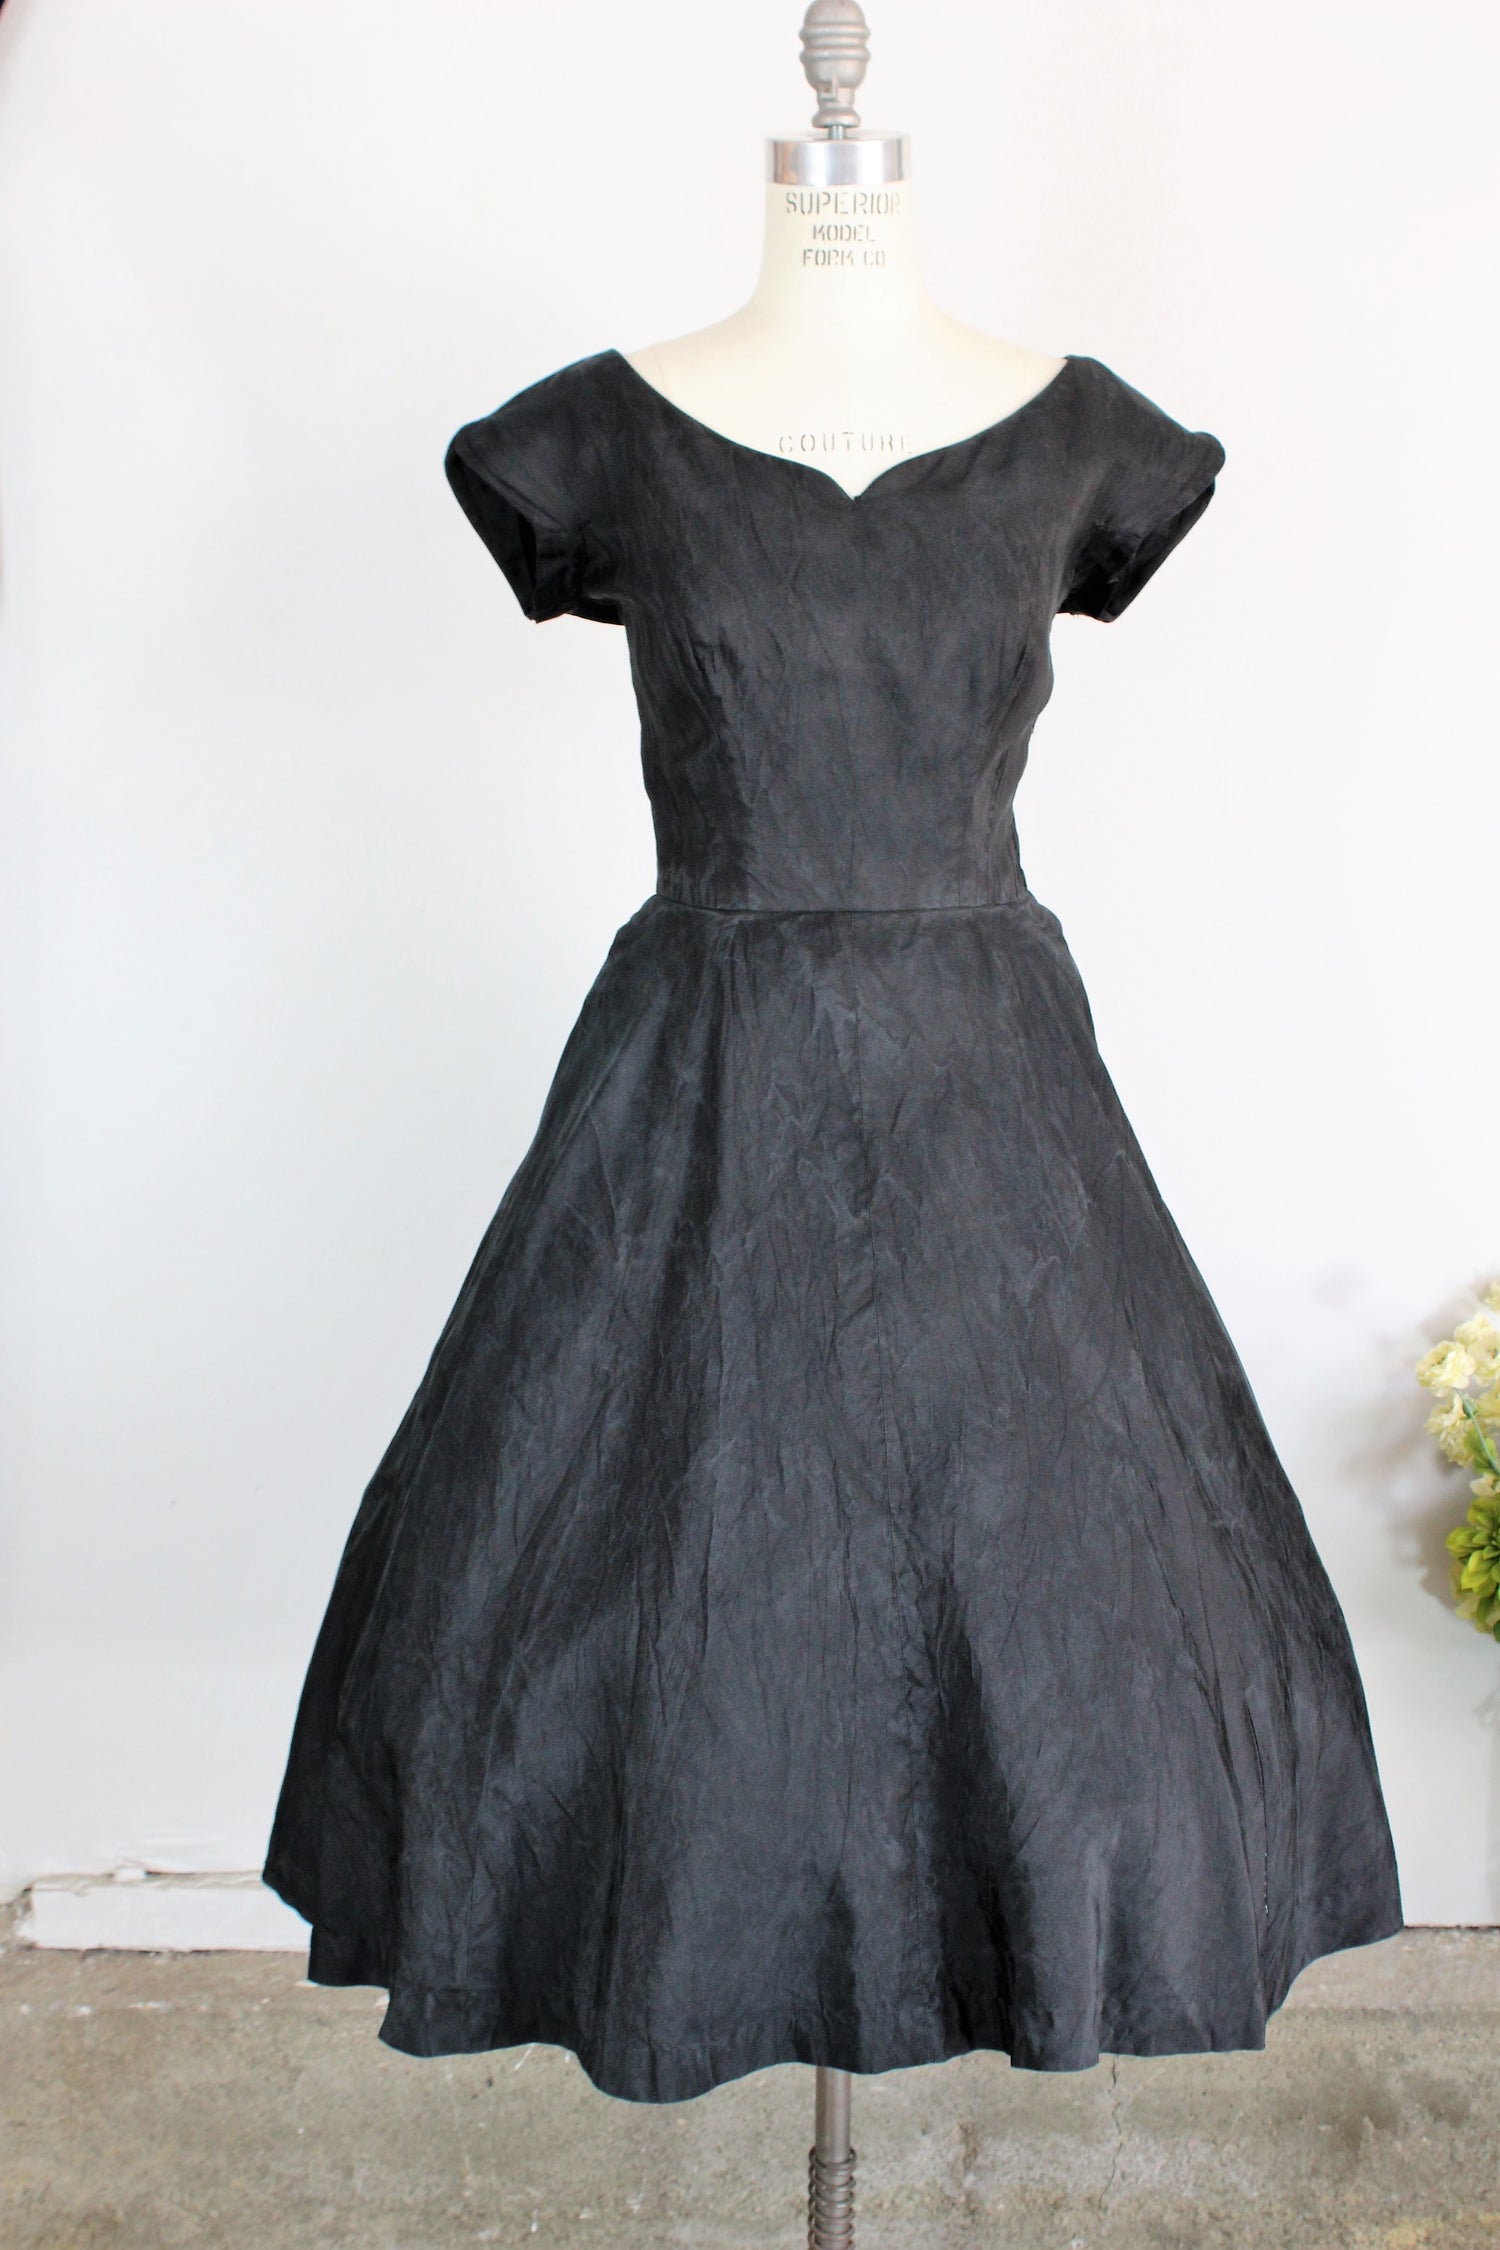 Vintage 1950s Black Fit And Flare Dress With Pockets by Maurice Rentner